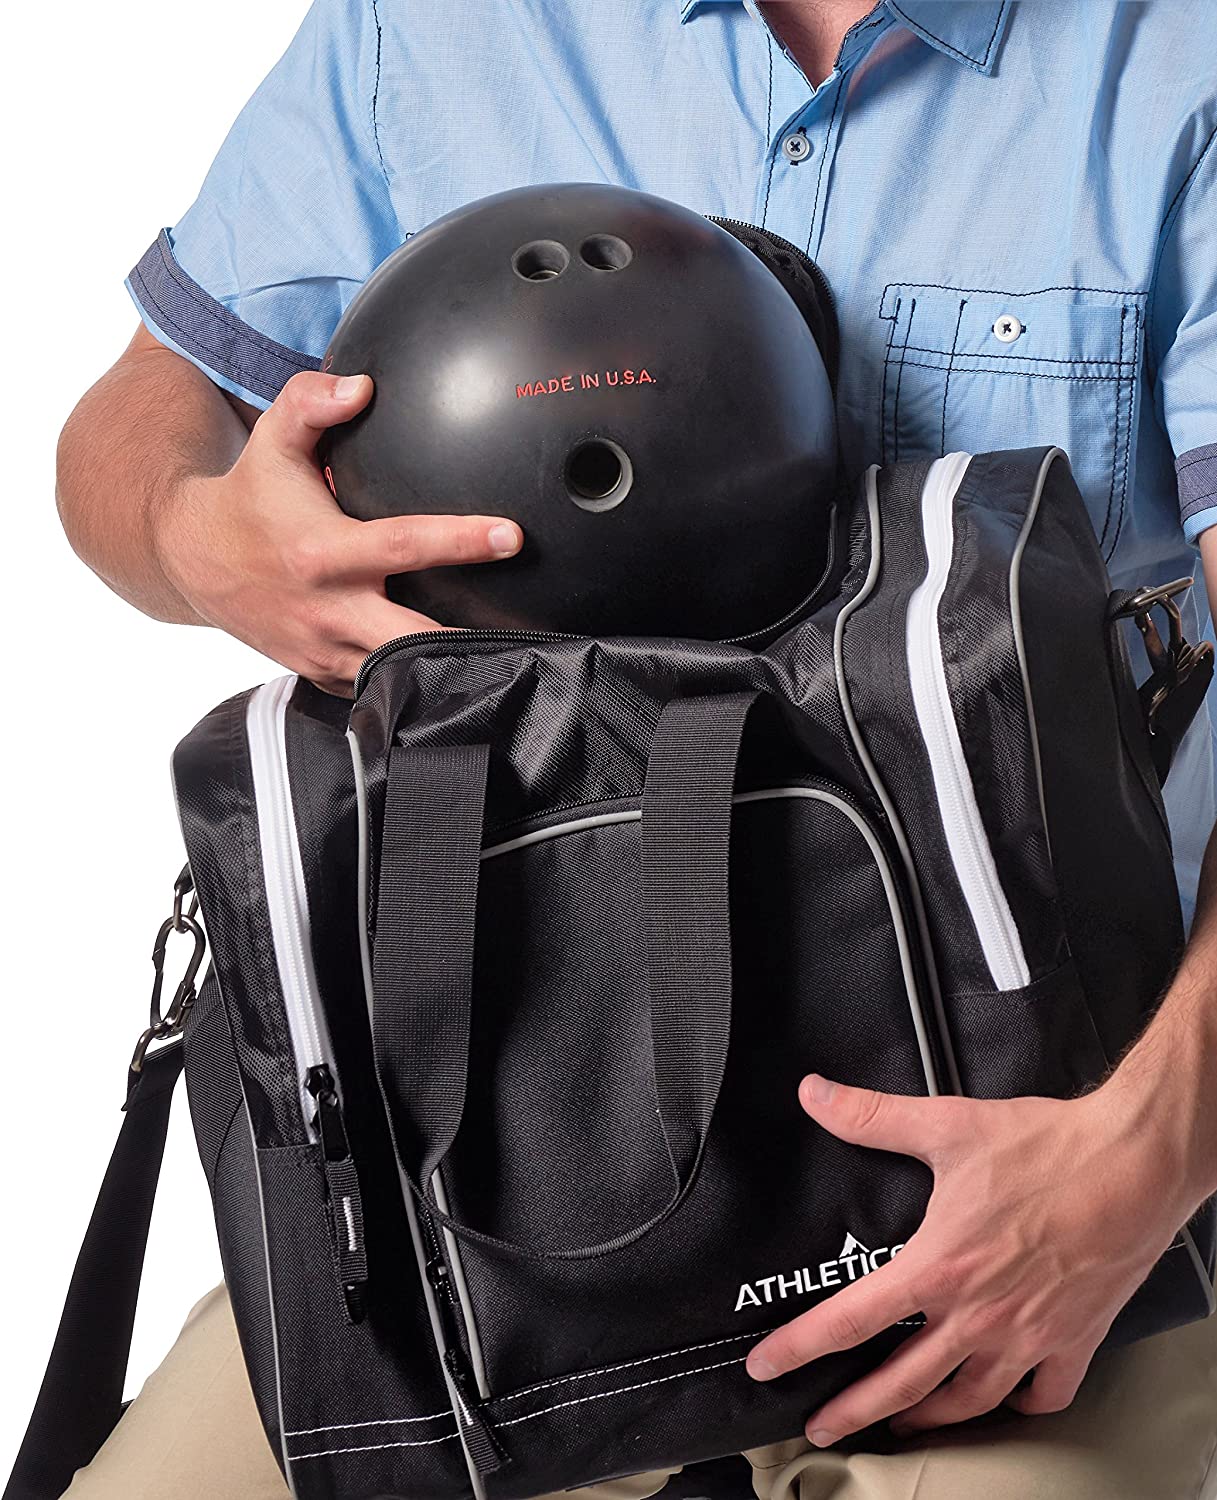 The All-in-One Bowling Bag